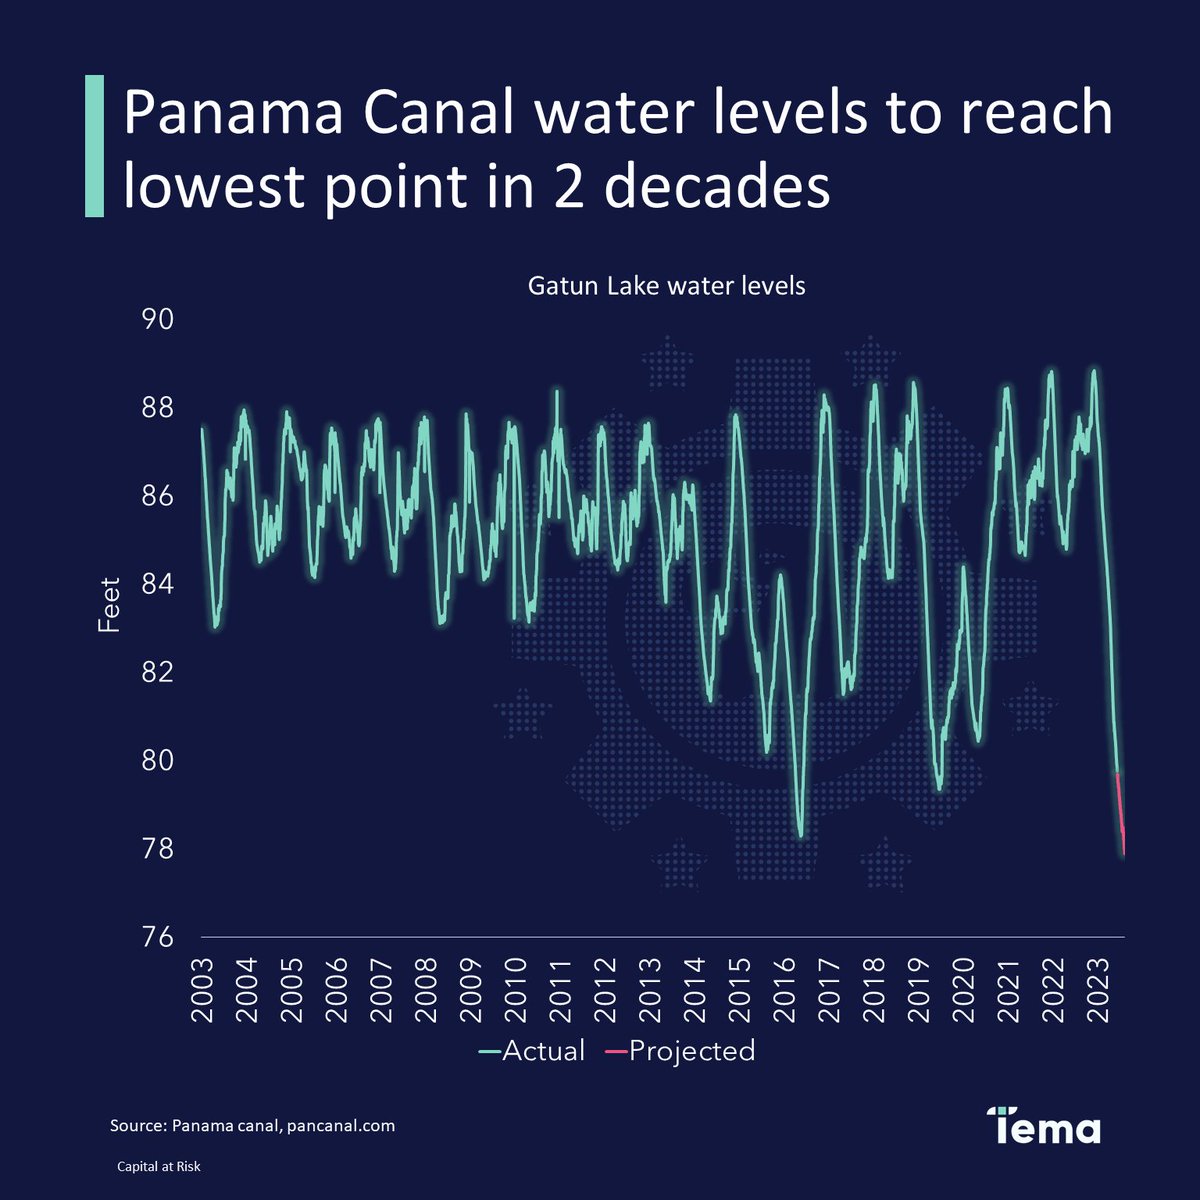 Unprecedented drought in Panama Canal forcing some ships to offload 40% of their cargo. 

Yet another #supplychain risk likely causing firms to keep considering reshoring.